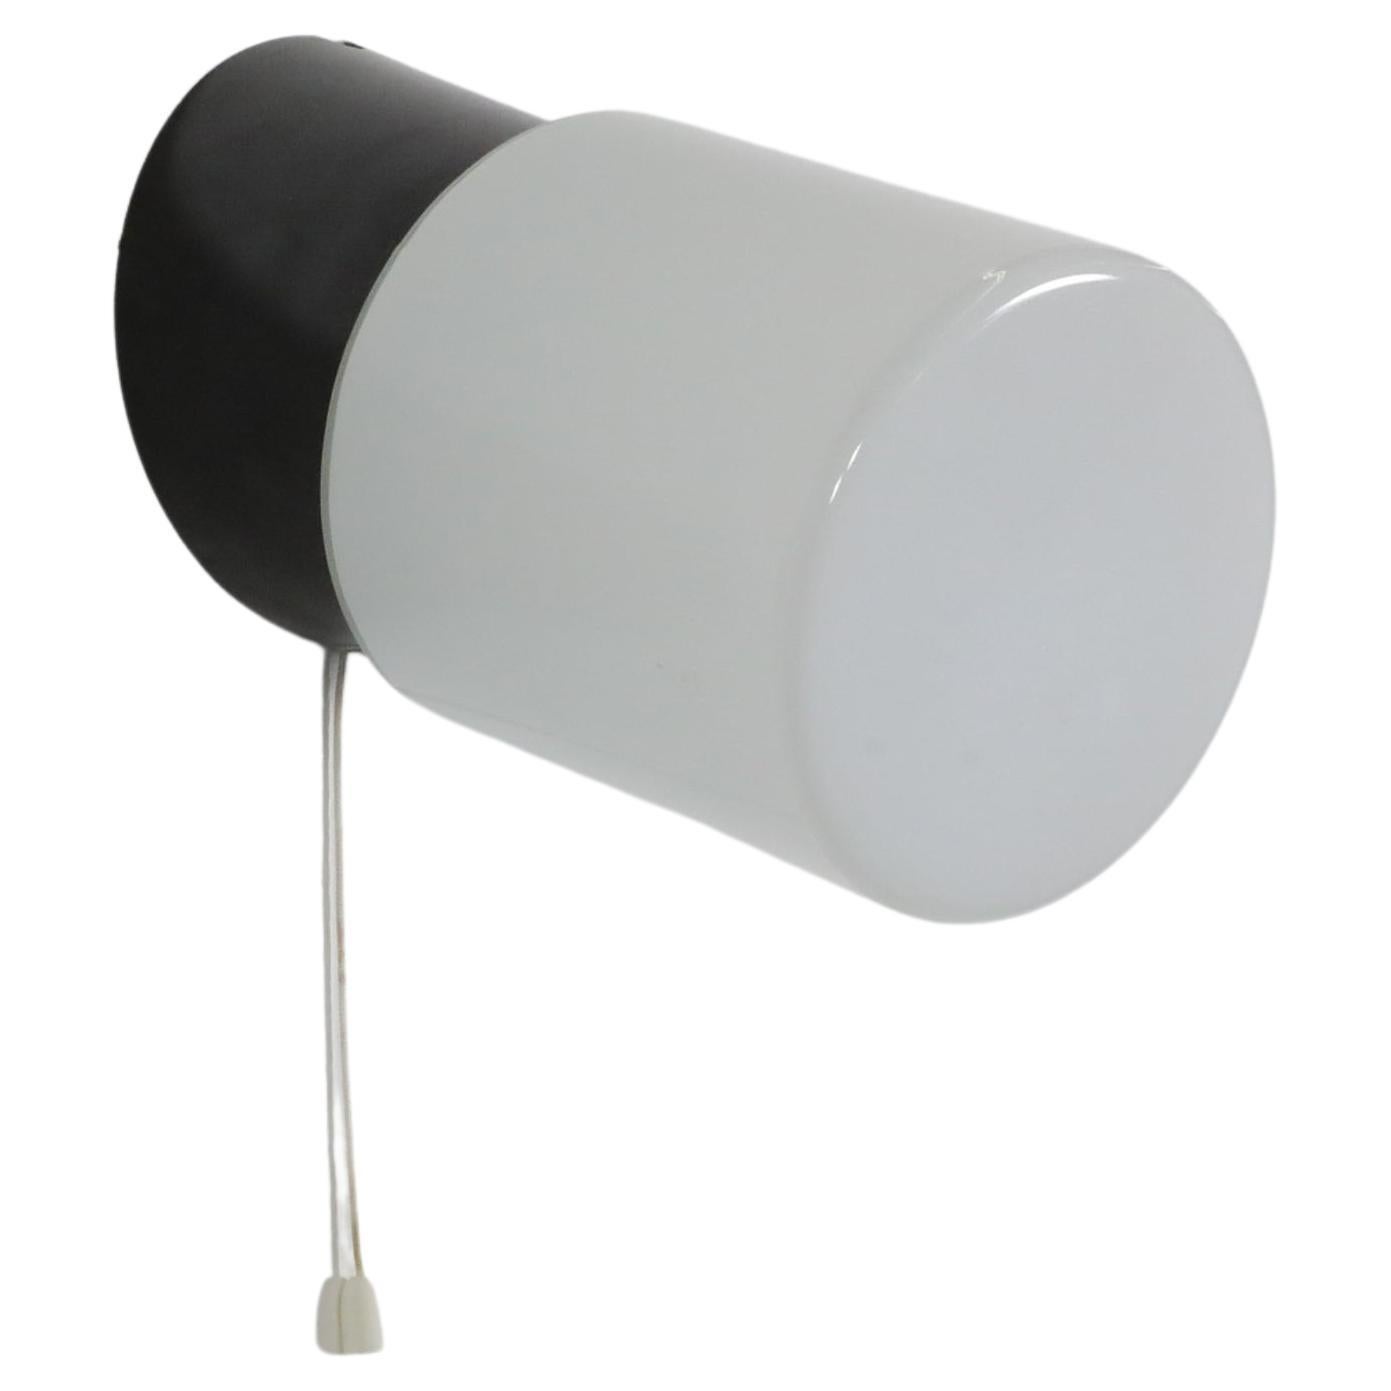 Cylinder Milk Glass Sconce with Black Bakelite Base and Pull String Switch For Sale